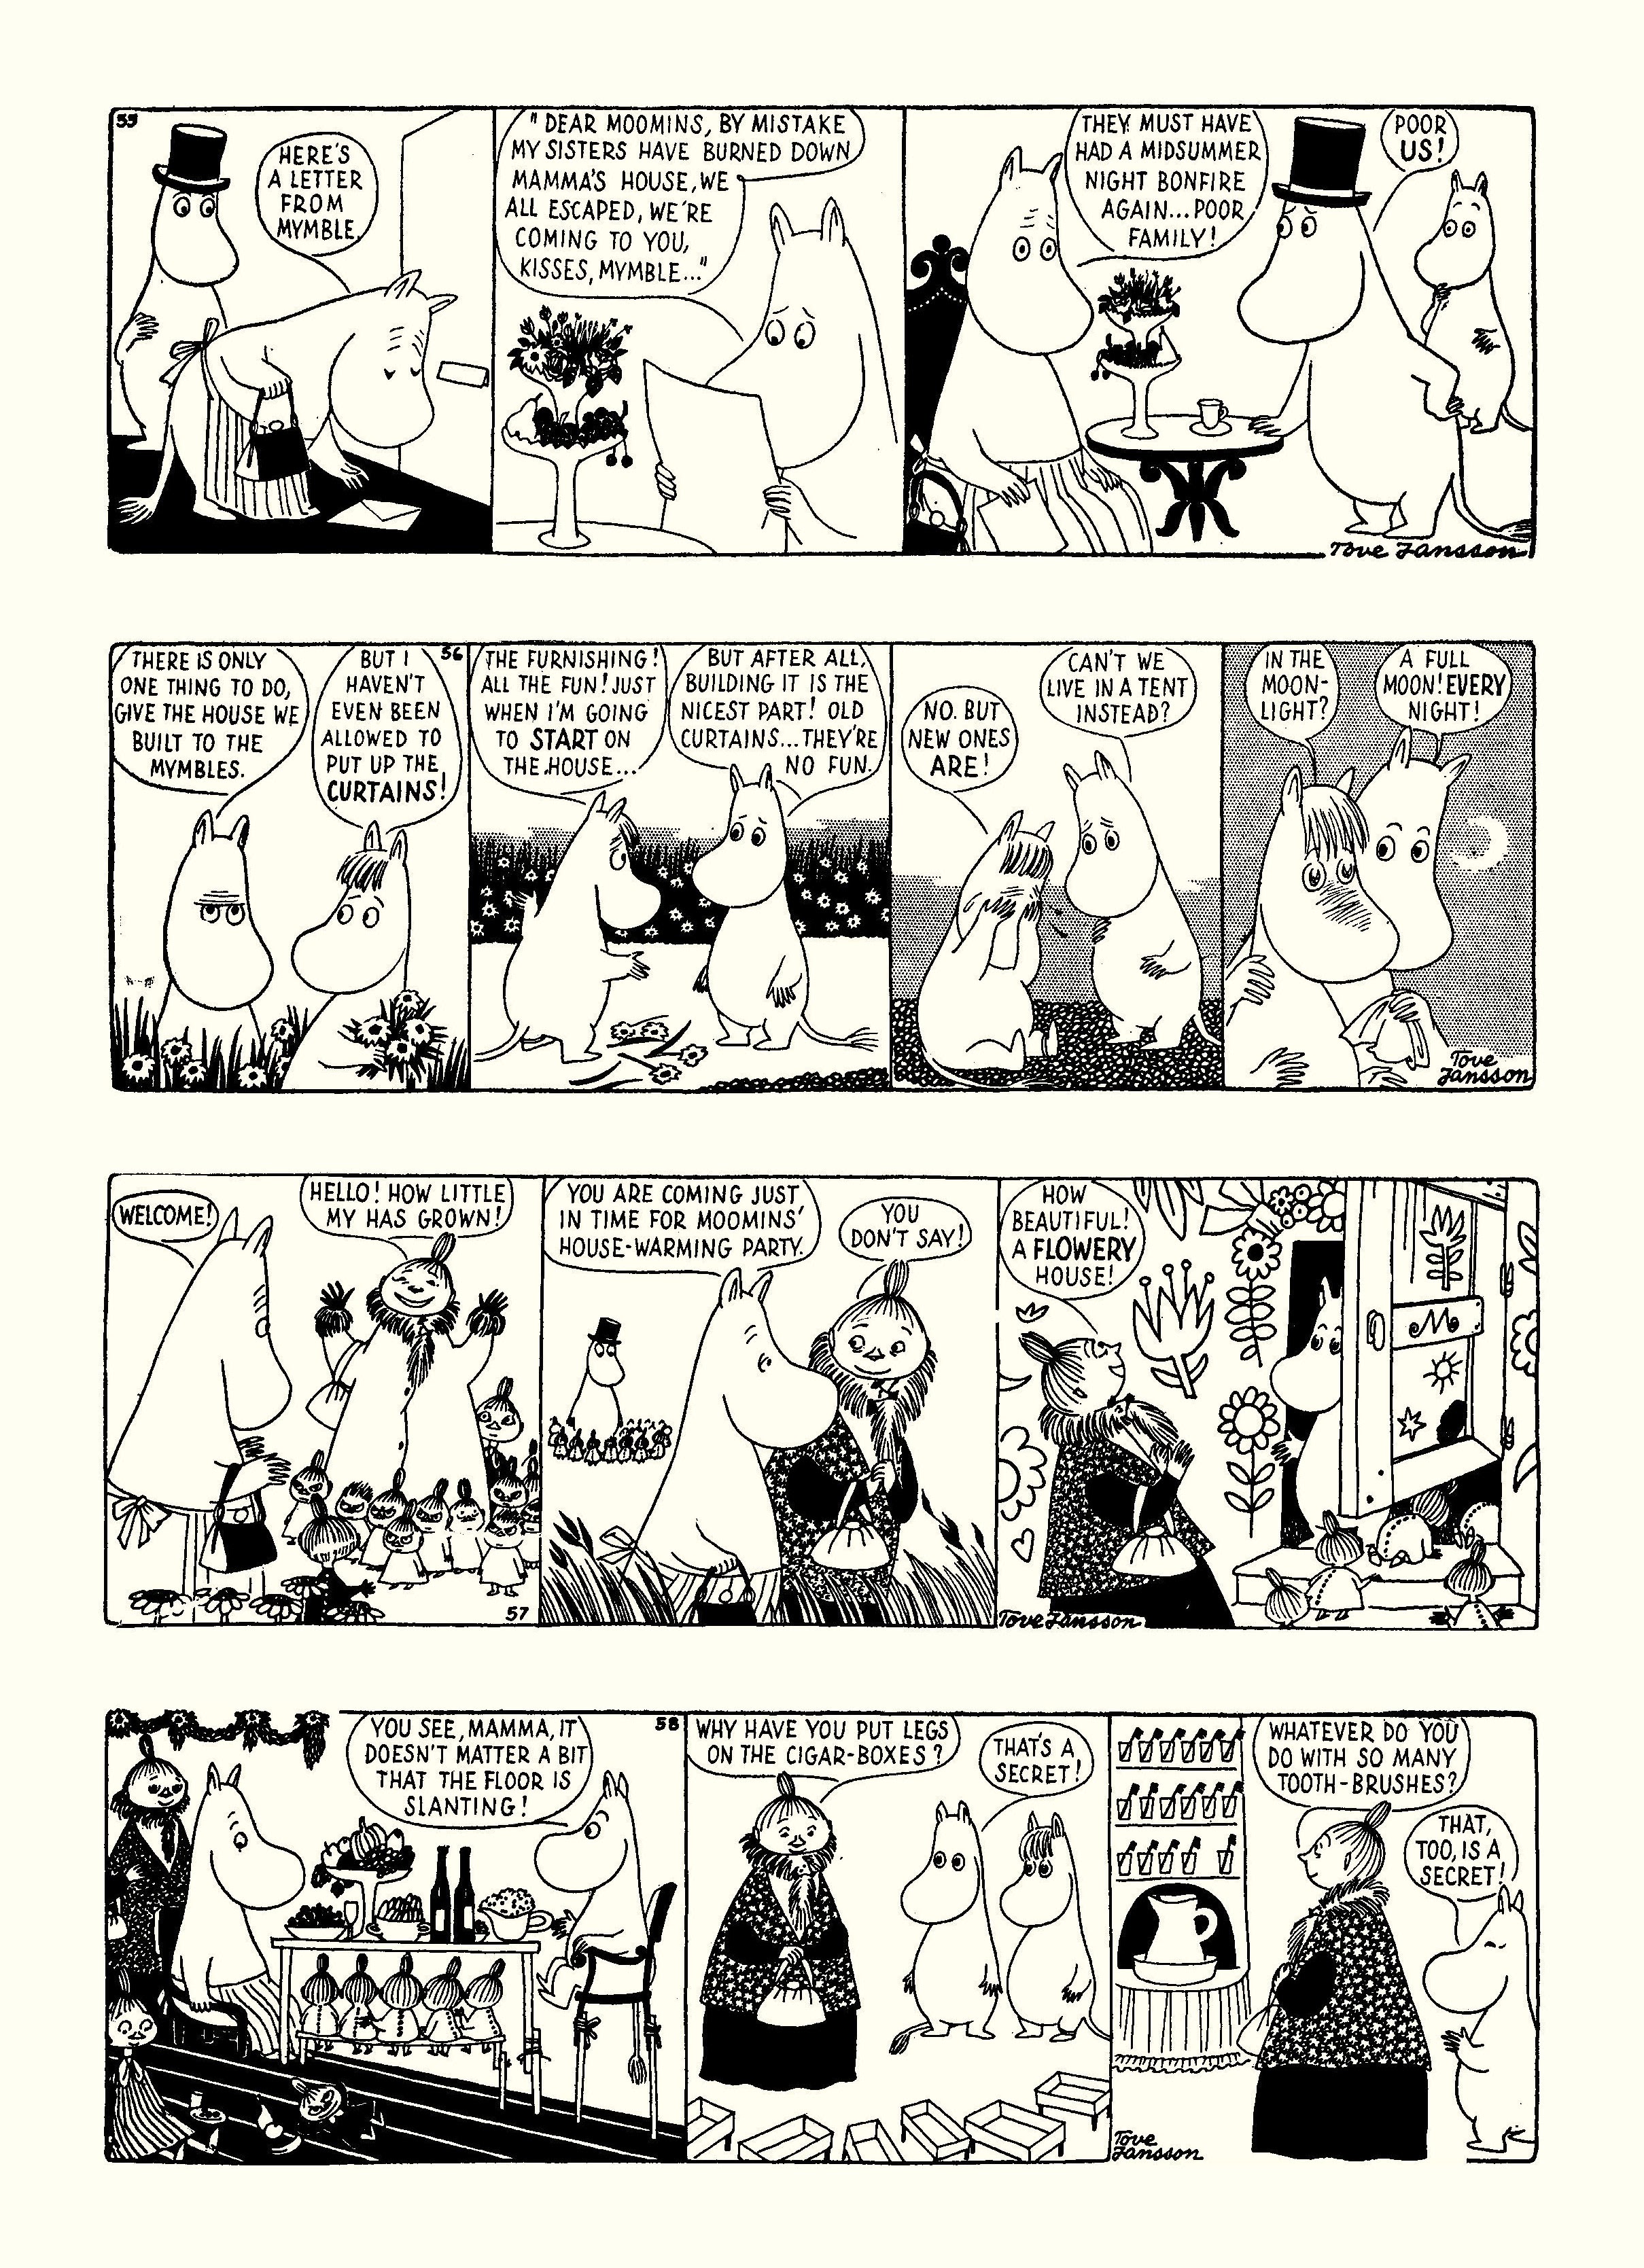 Read online Moomin: The Complete Tove Jansson Comic Strip comic -  Issue # TPB 2 - 62